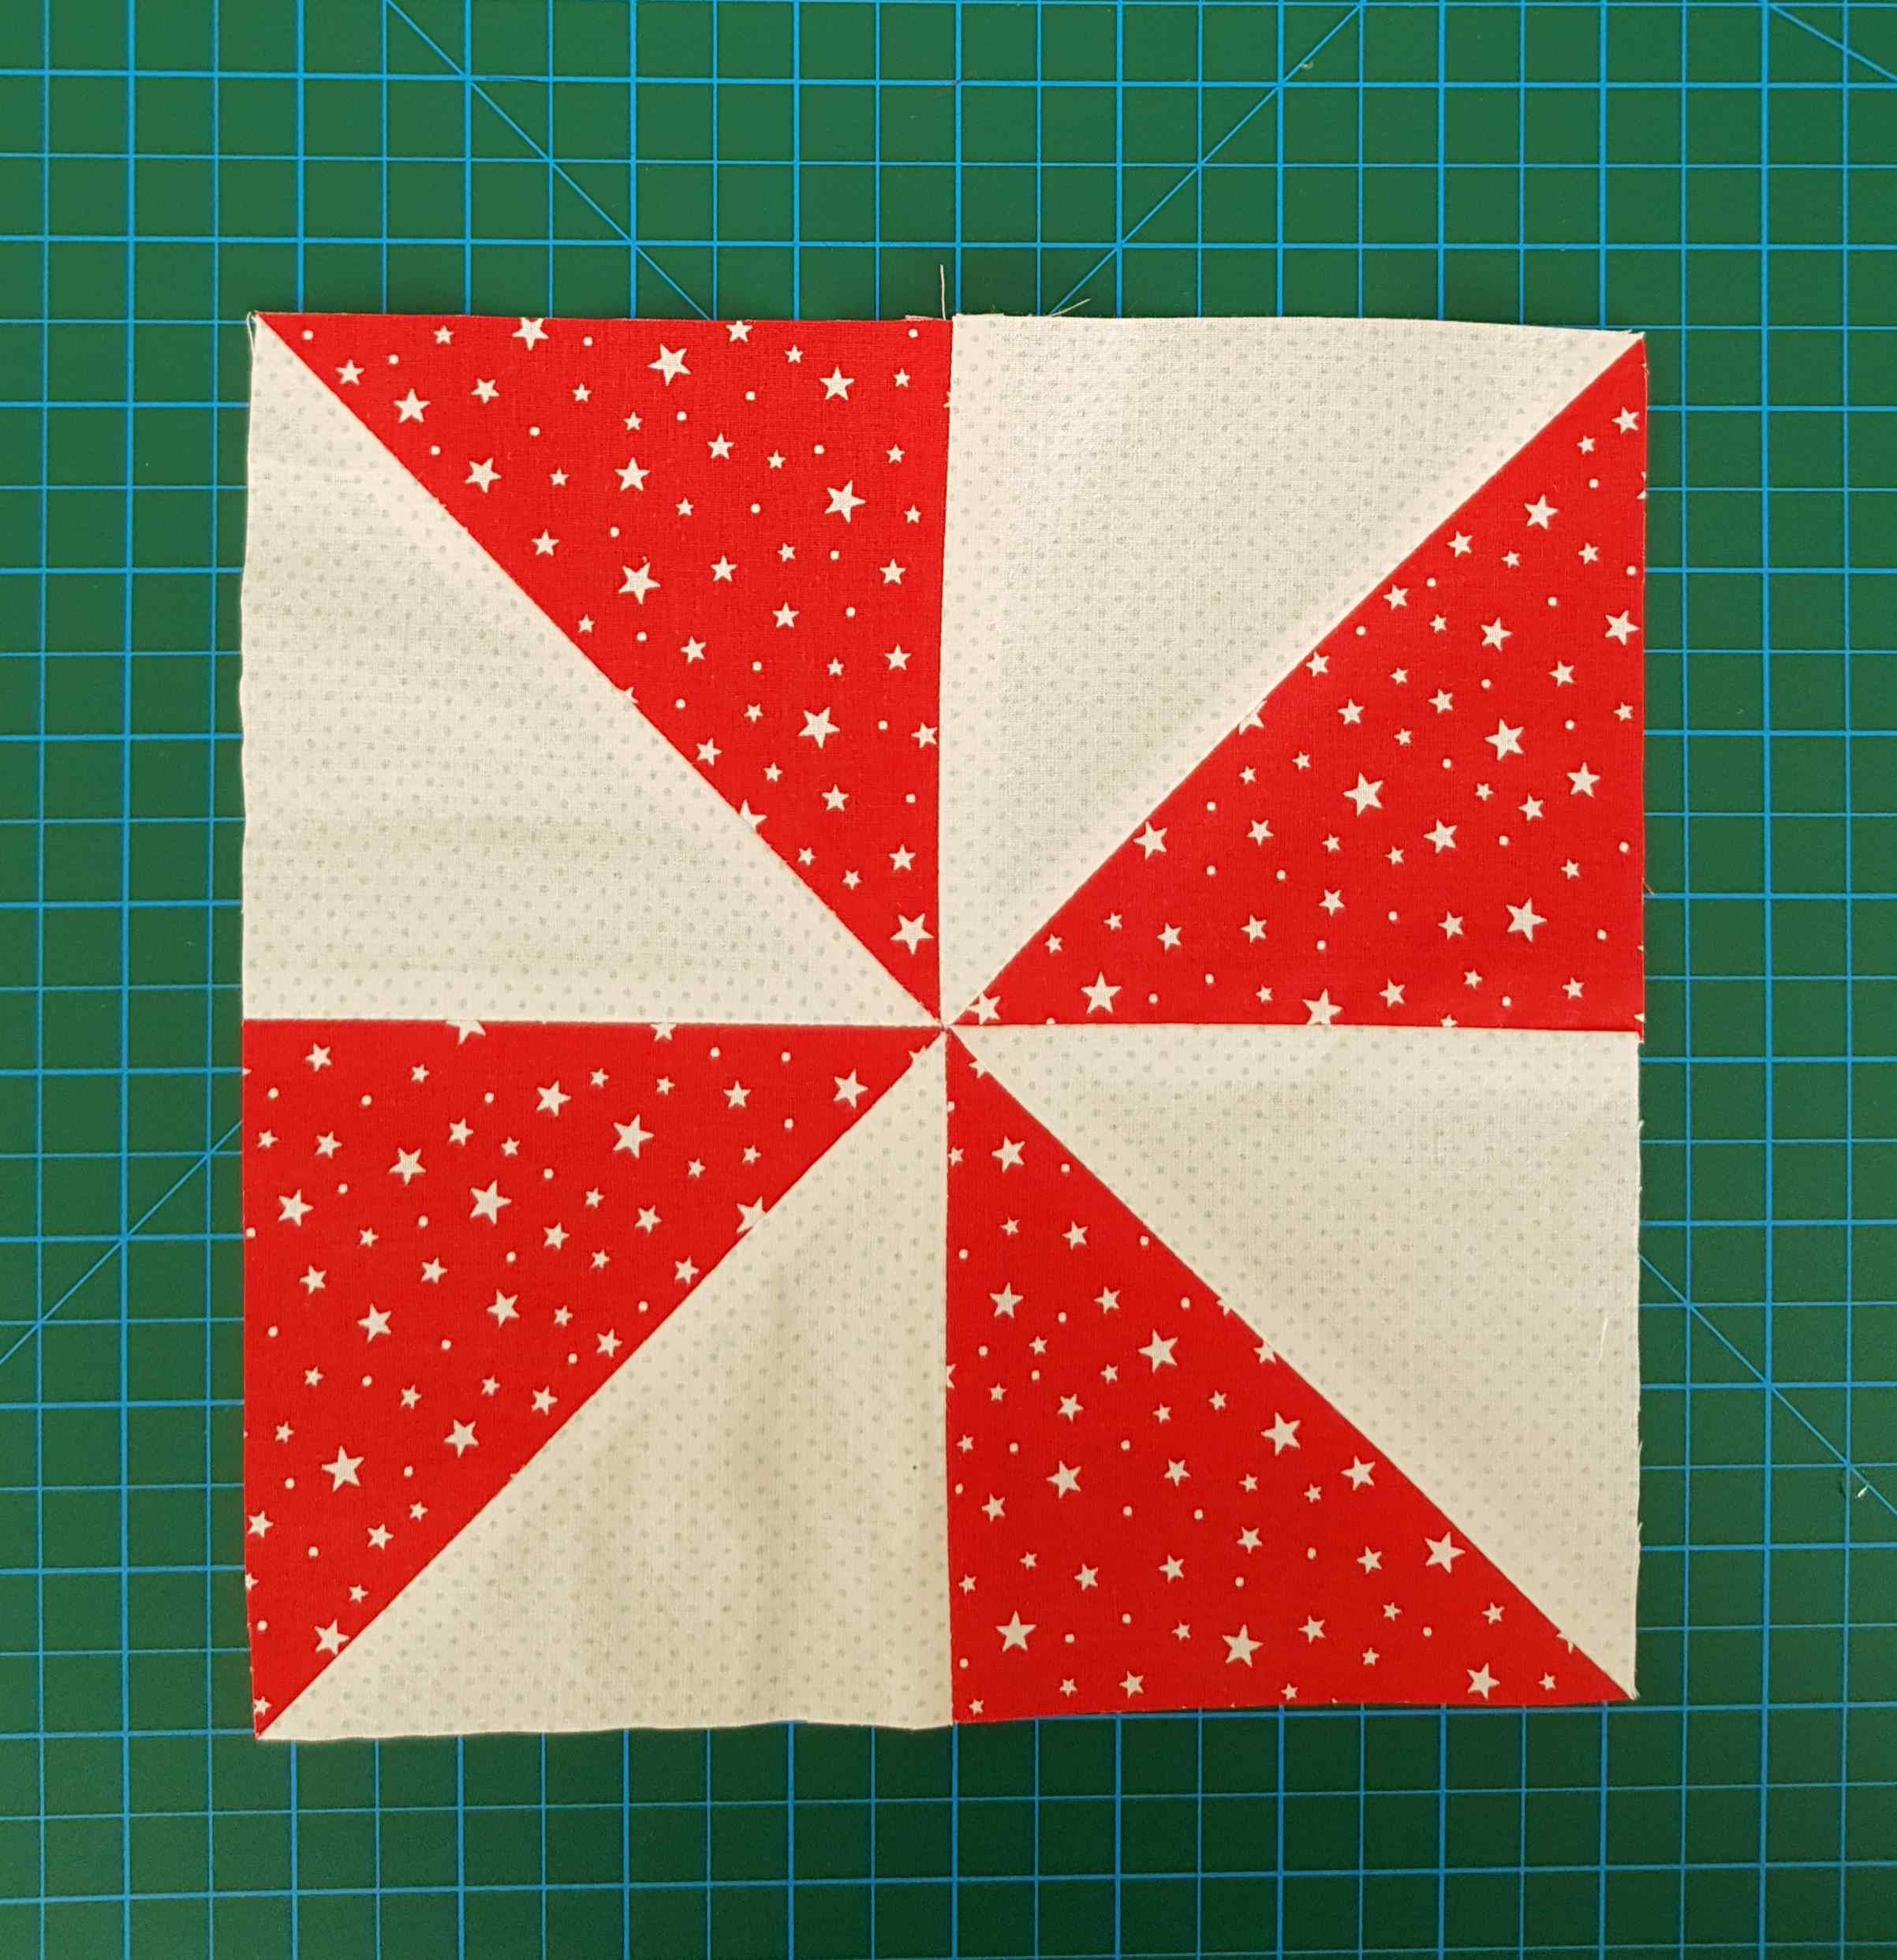 pinwheel-quilt-tutorial-all-about-patchwork-and-quilting